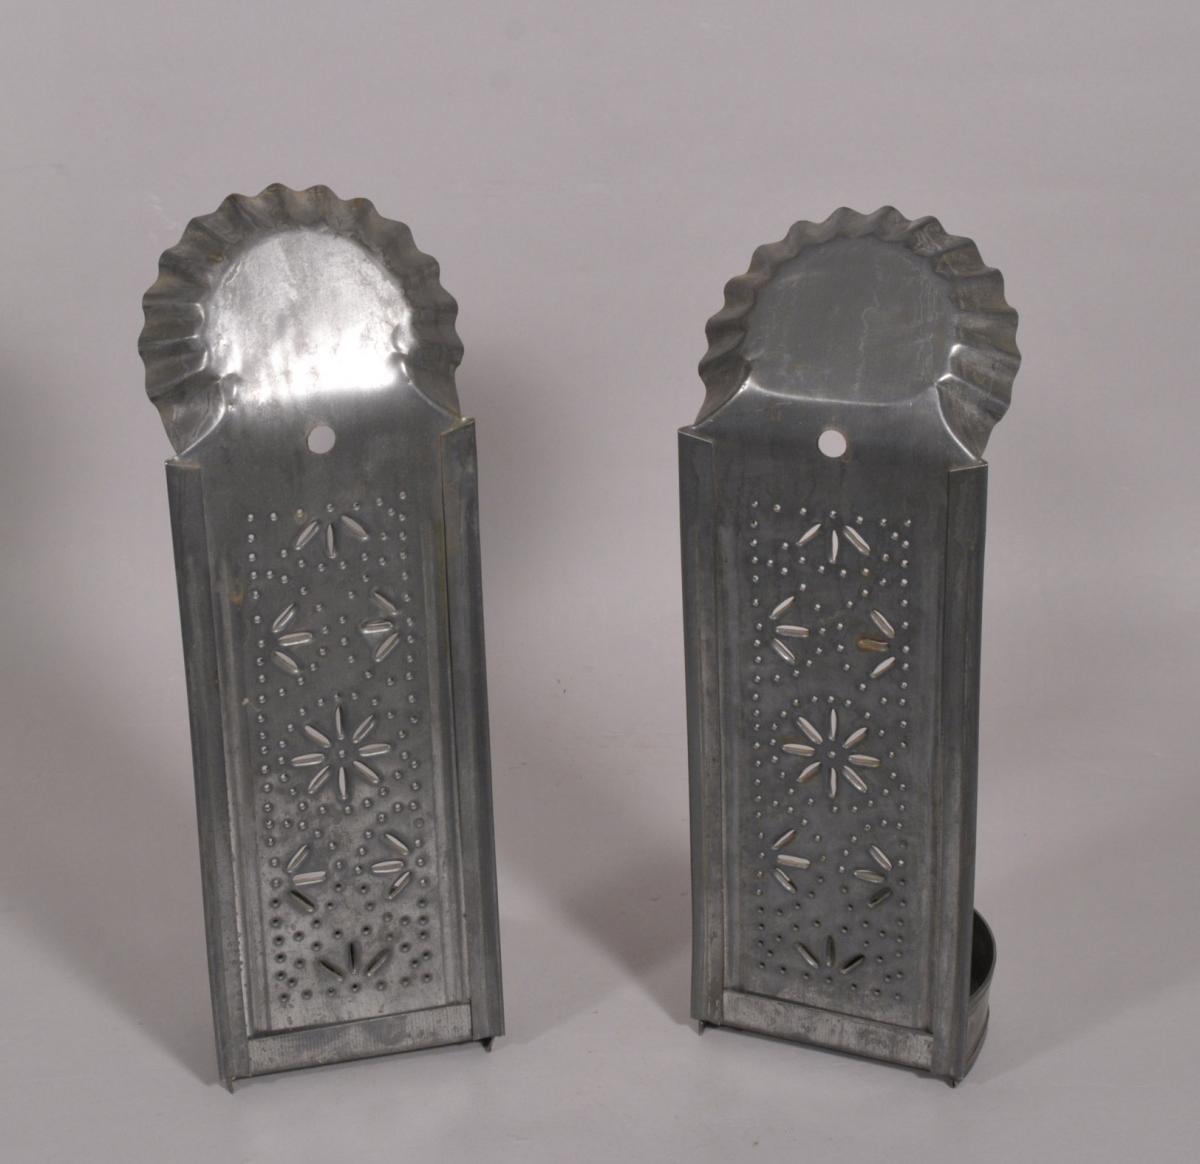 S/4295 Antique 19th Century Pair of Tin Wall Mounted Candle Sconces